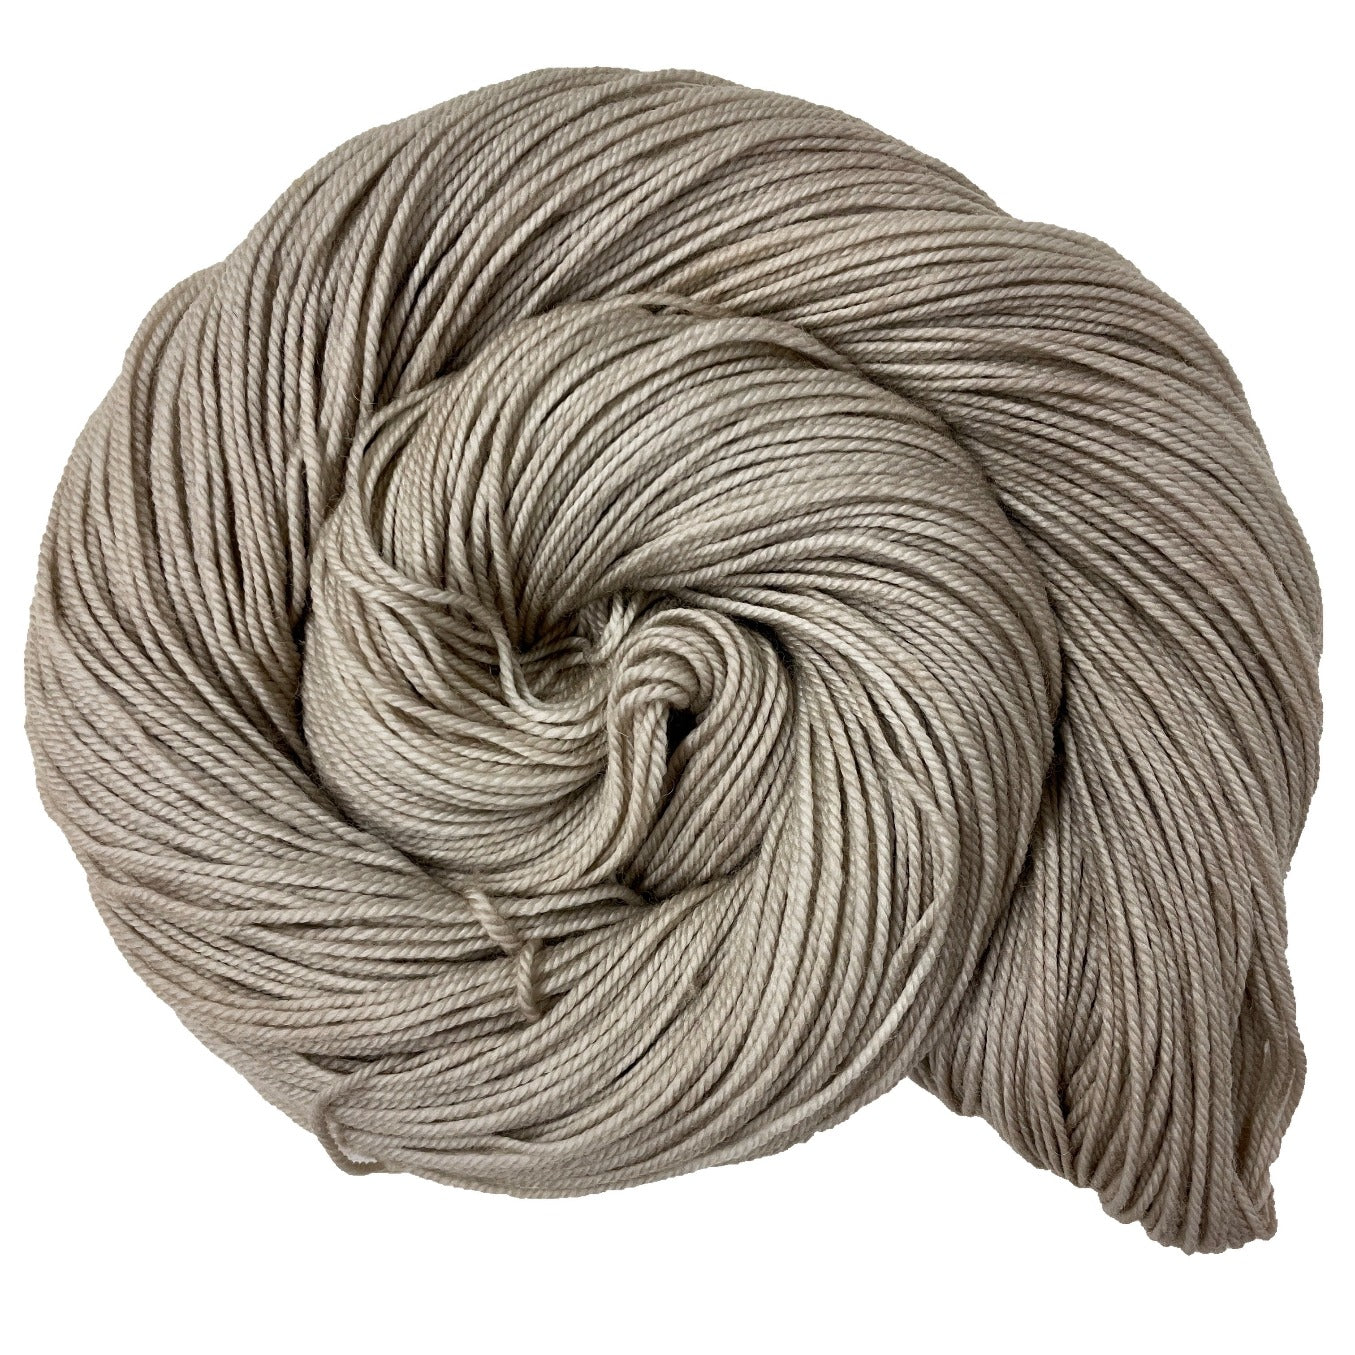 Photo of the Dusty Sophisticate colorway by Knitted Wit Sport